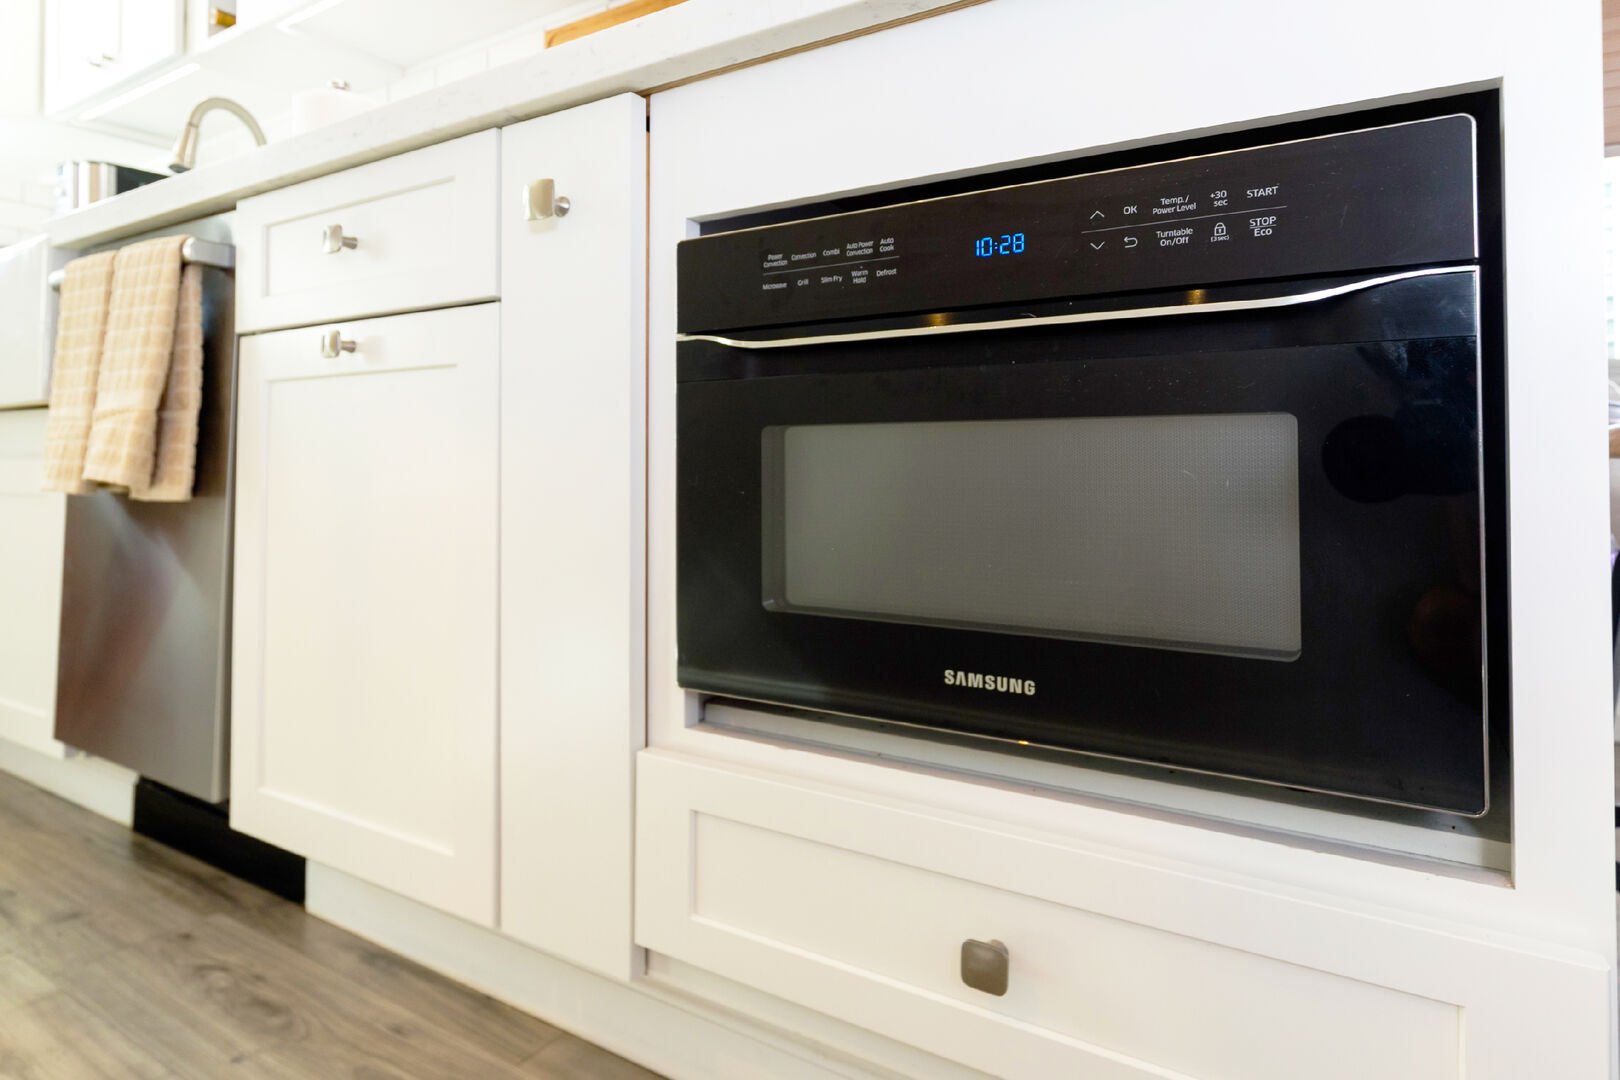 Microwave convection oven combo